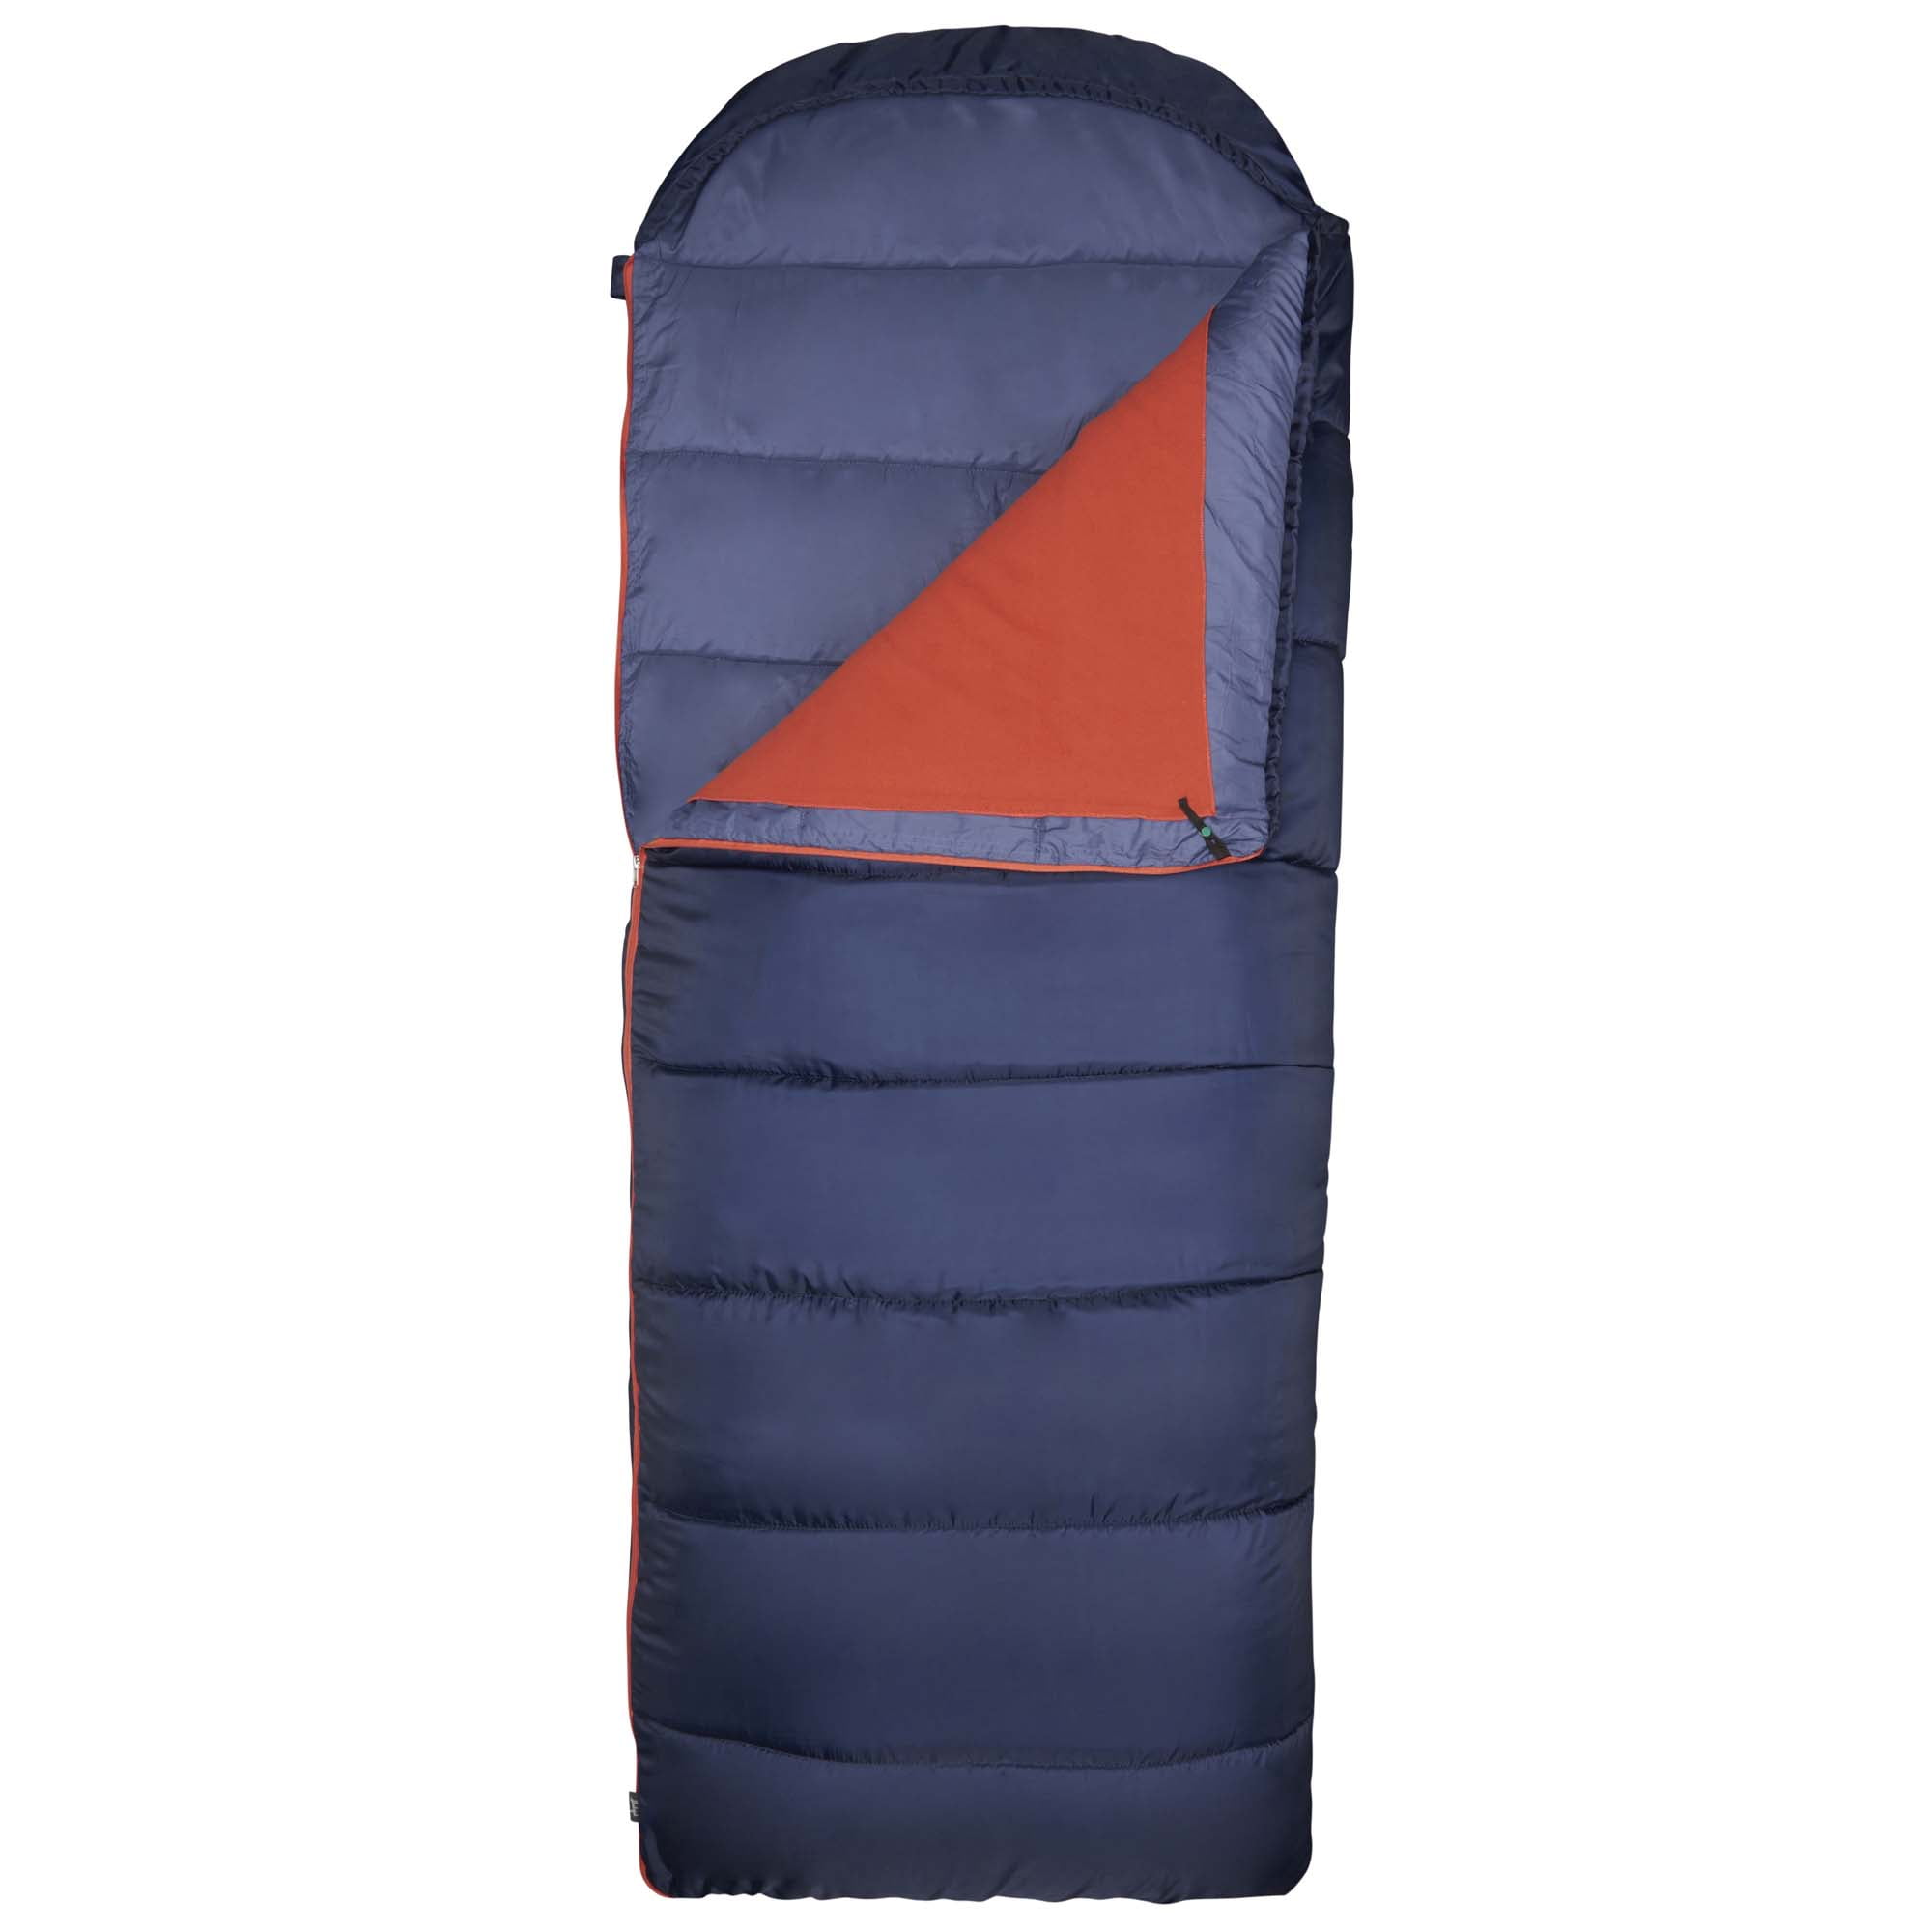 FE Active Camping Sleeping Bag 3-4 Seasons Extra Long for Cold Weather Hooded 